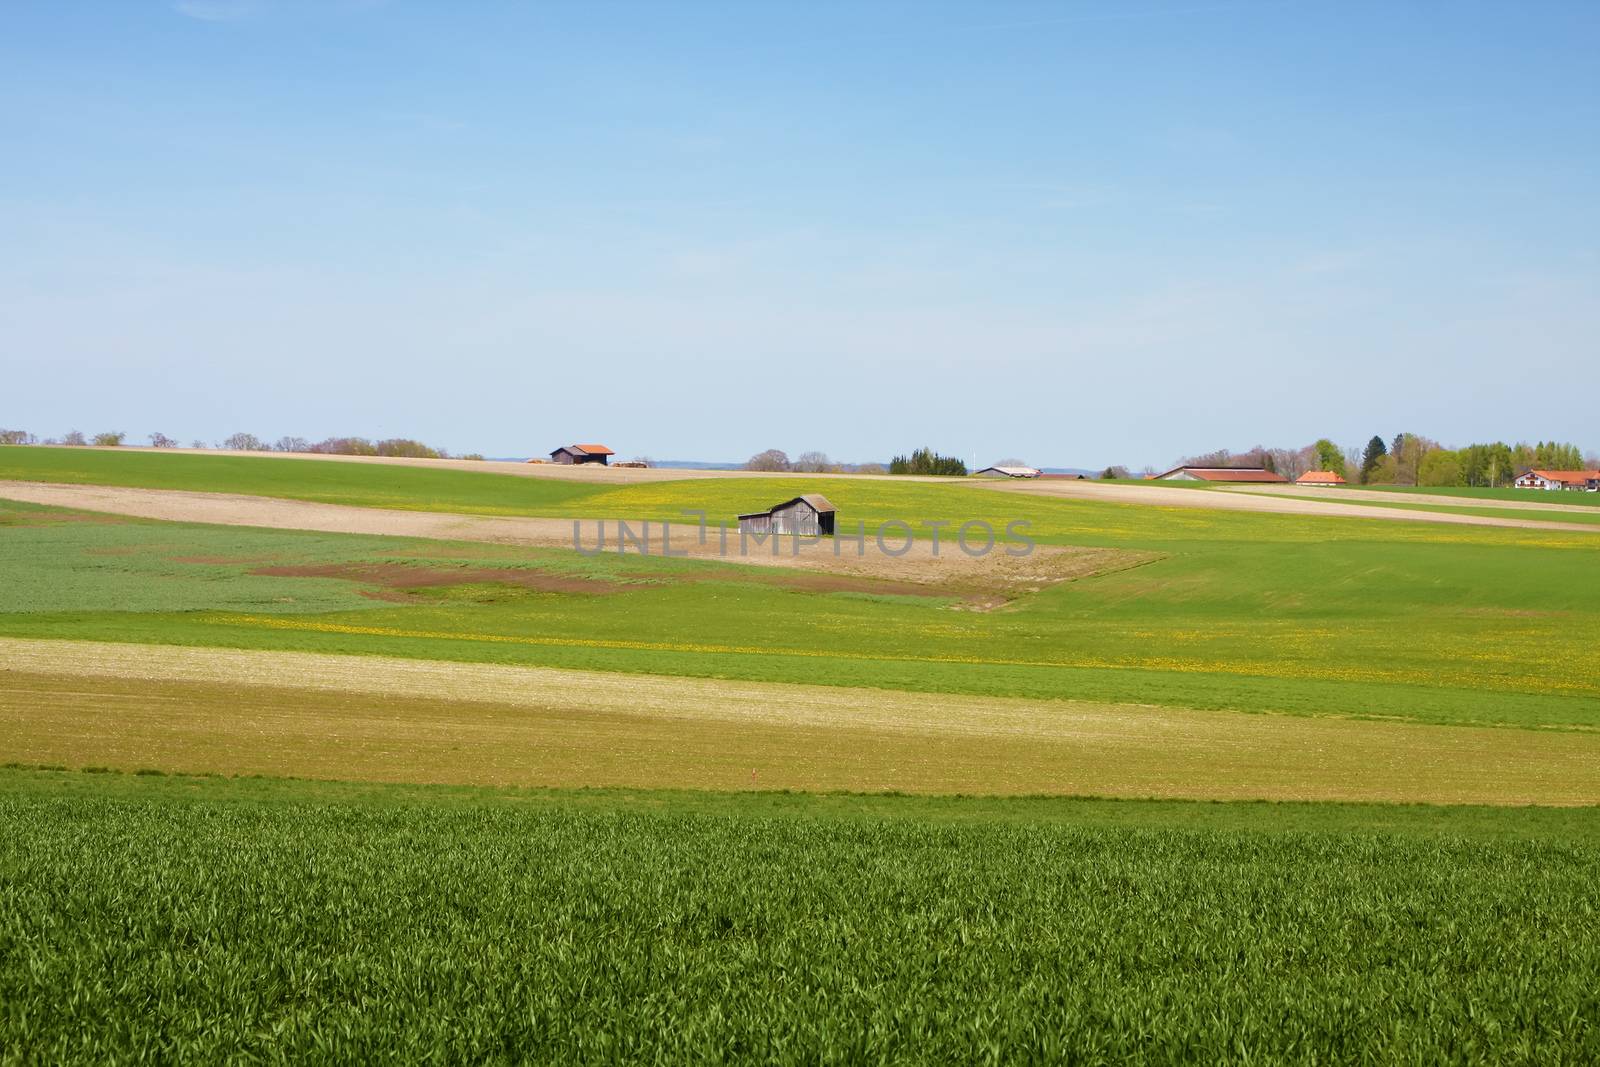 An image of a bavarian landscape scenery